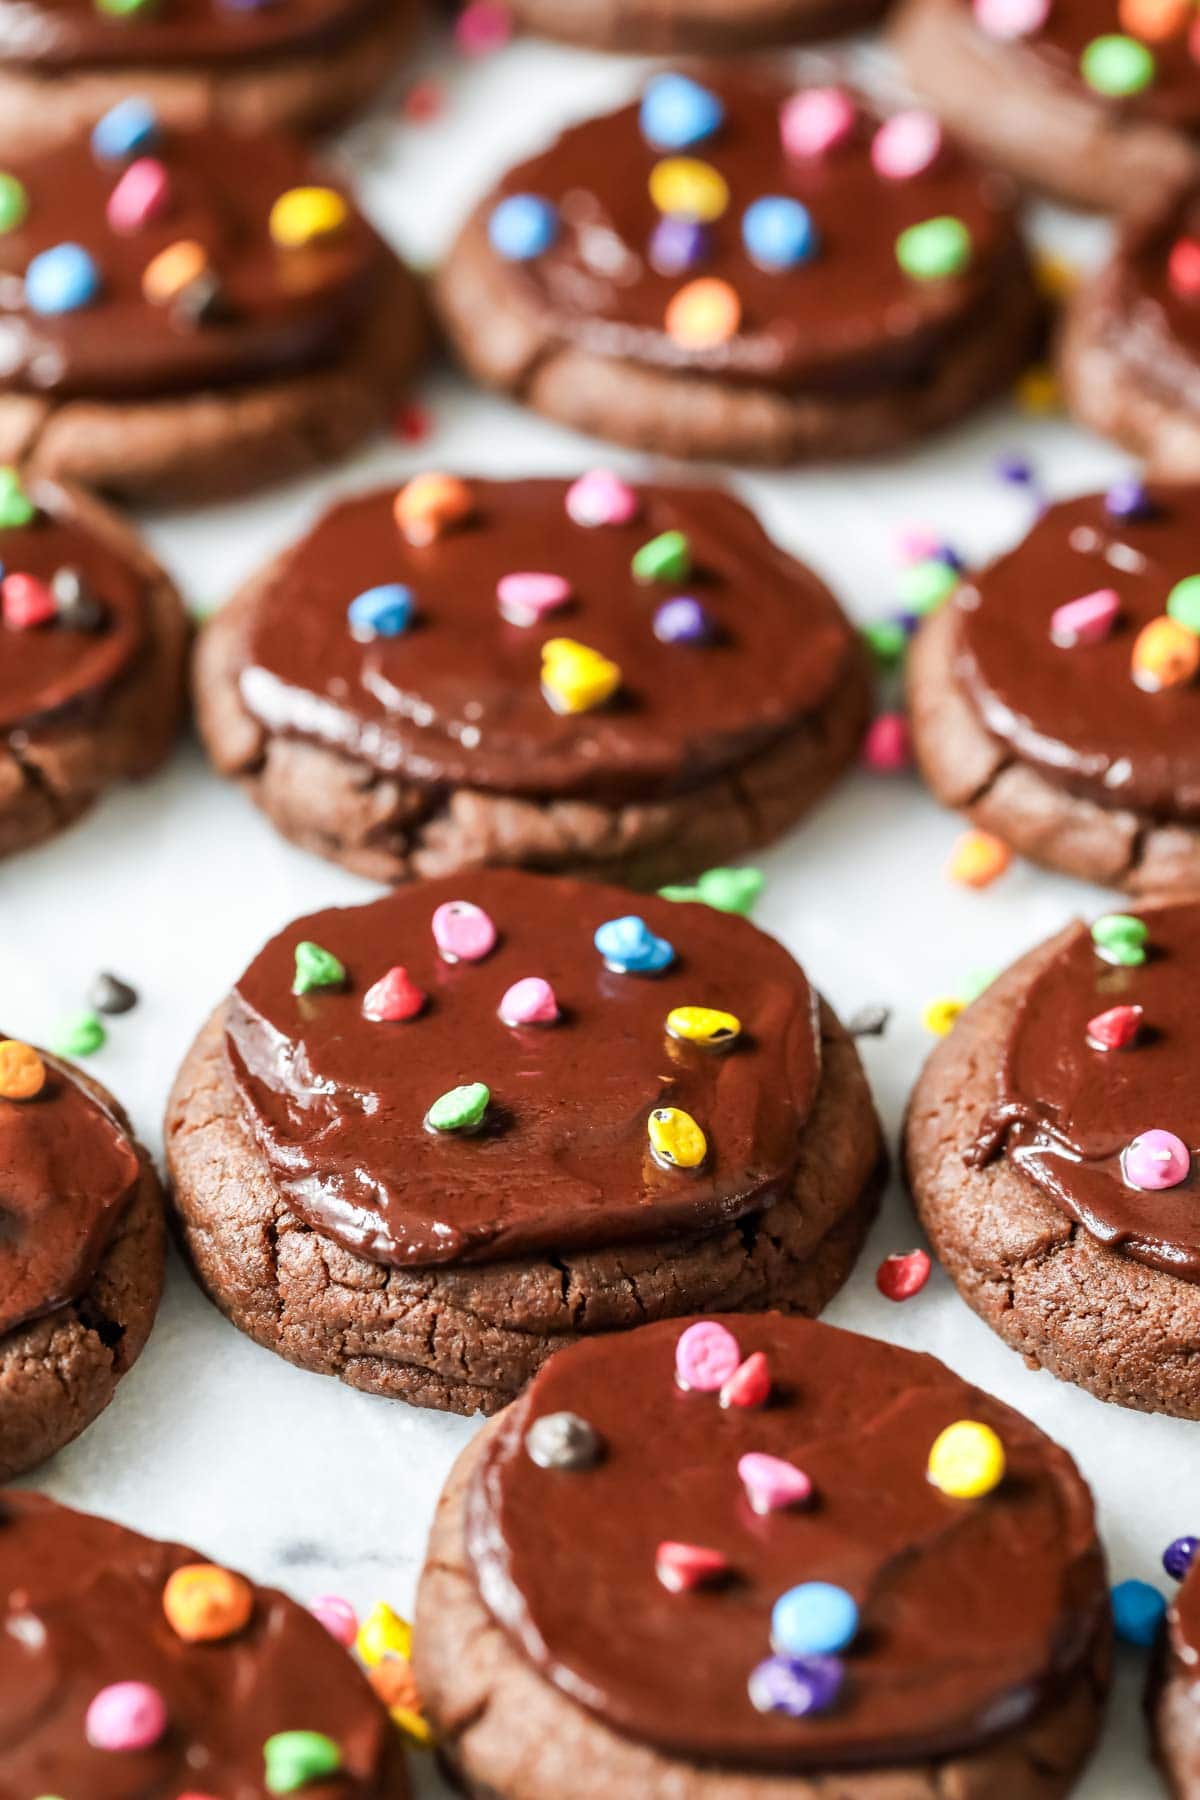 Chocolate cookies topped with fudge frosting and colored candy chips to look like cosmic brownies.